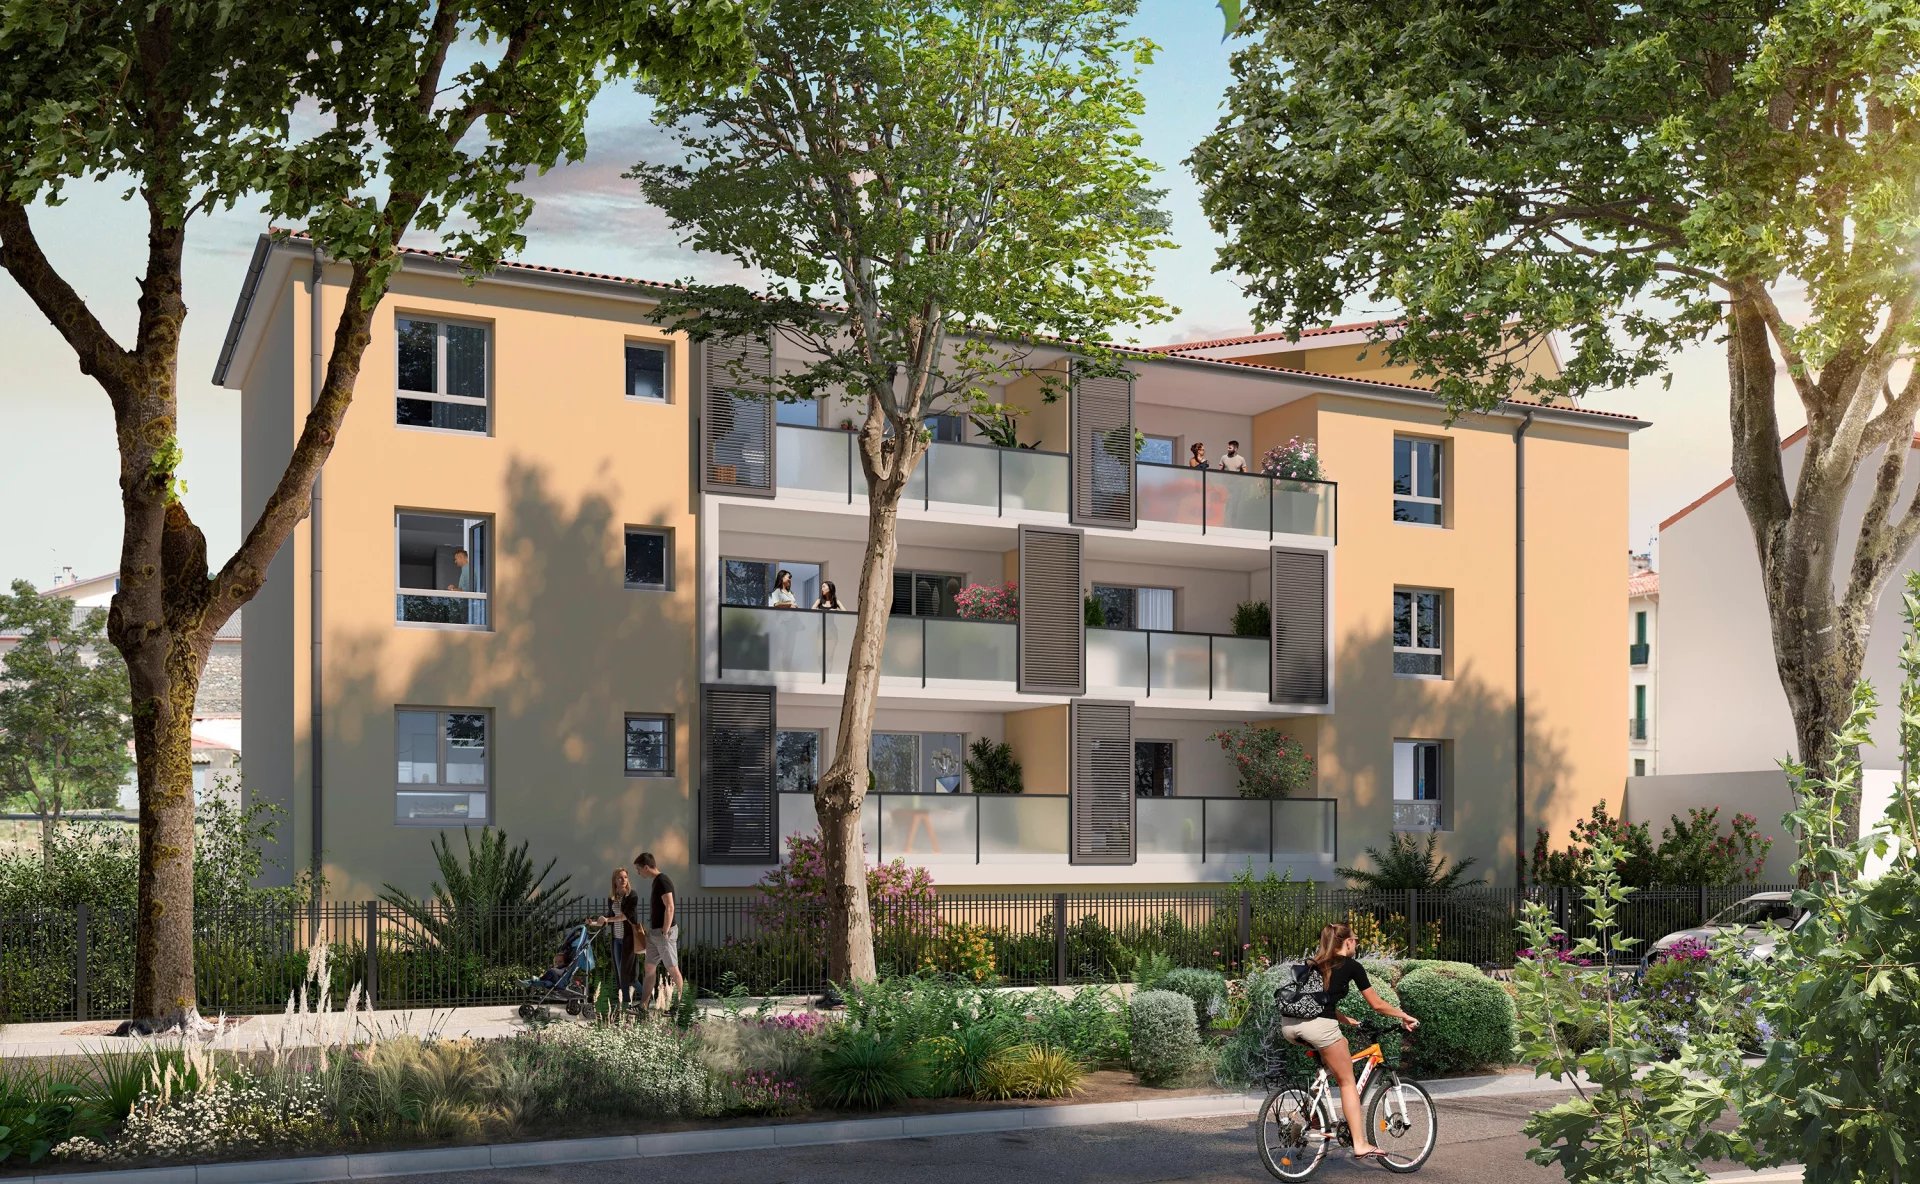 OFF-PLAN 3-BED APPARTMENT (LOT 303), RESIDENCE L'ANGLE DES ARTS, CERET